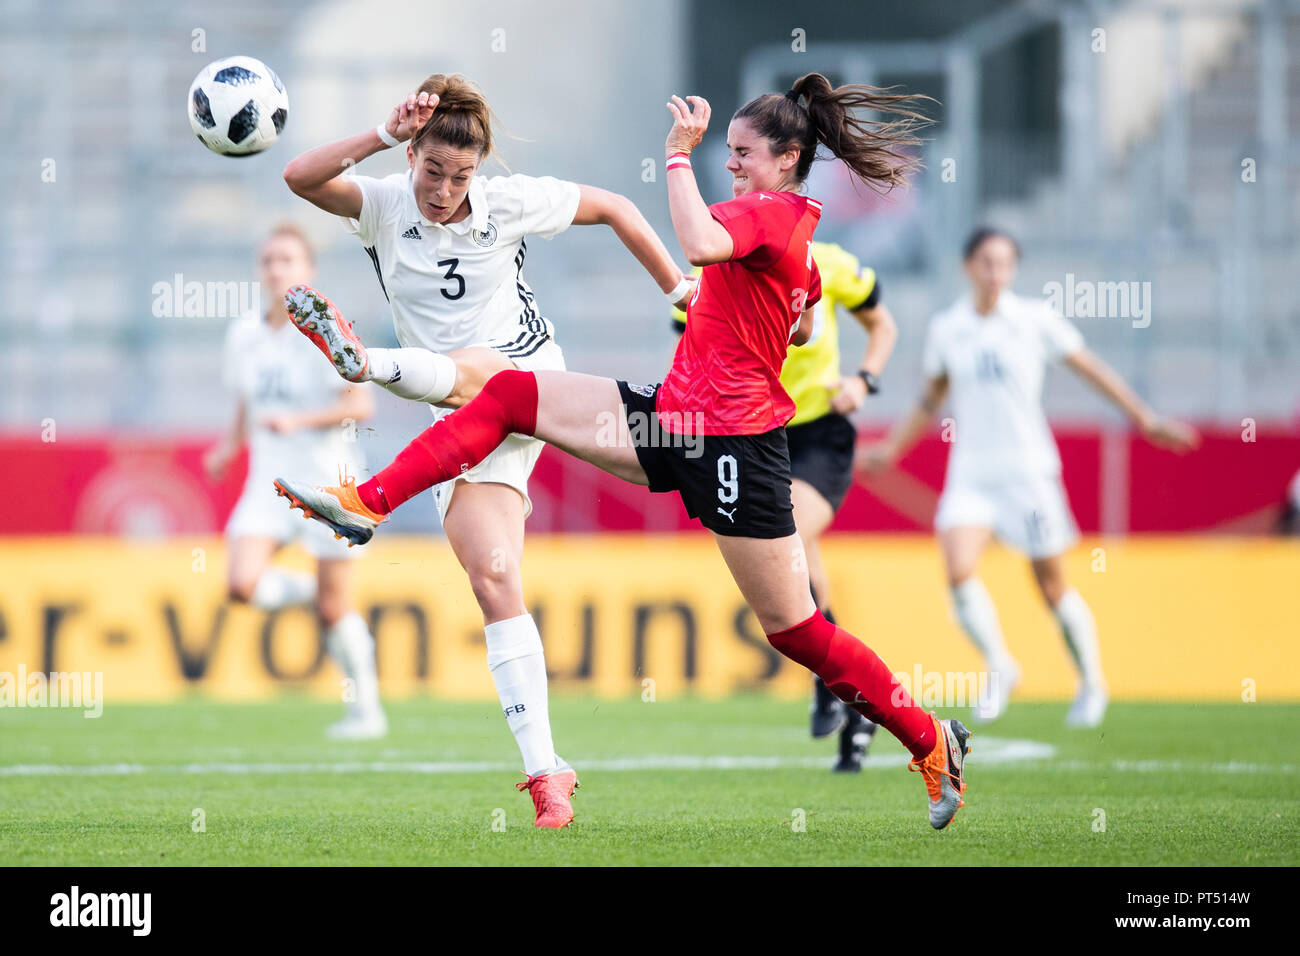 06 October 2018, North Rhine-Westphalia, Essen: 06 October 2018, Germany, Essen: Soccer, women: Friendly match, Germany vs Austria at the Essen stadium. Germany's Felicitas Rauch (L) and Austria's Sarah Zadrazil (R) vie for the ball. Photo: Marcel Kusch/dpa - IMPORTANT NOTICE: DFL an d DFB regulations prohibit any use of photographs as image sequences and/or quasi-video. Stock Photo